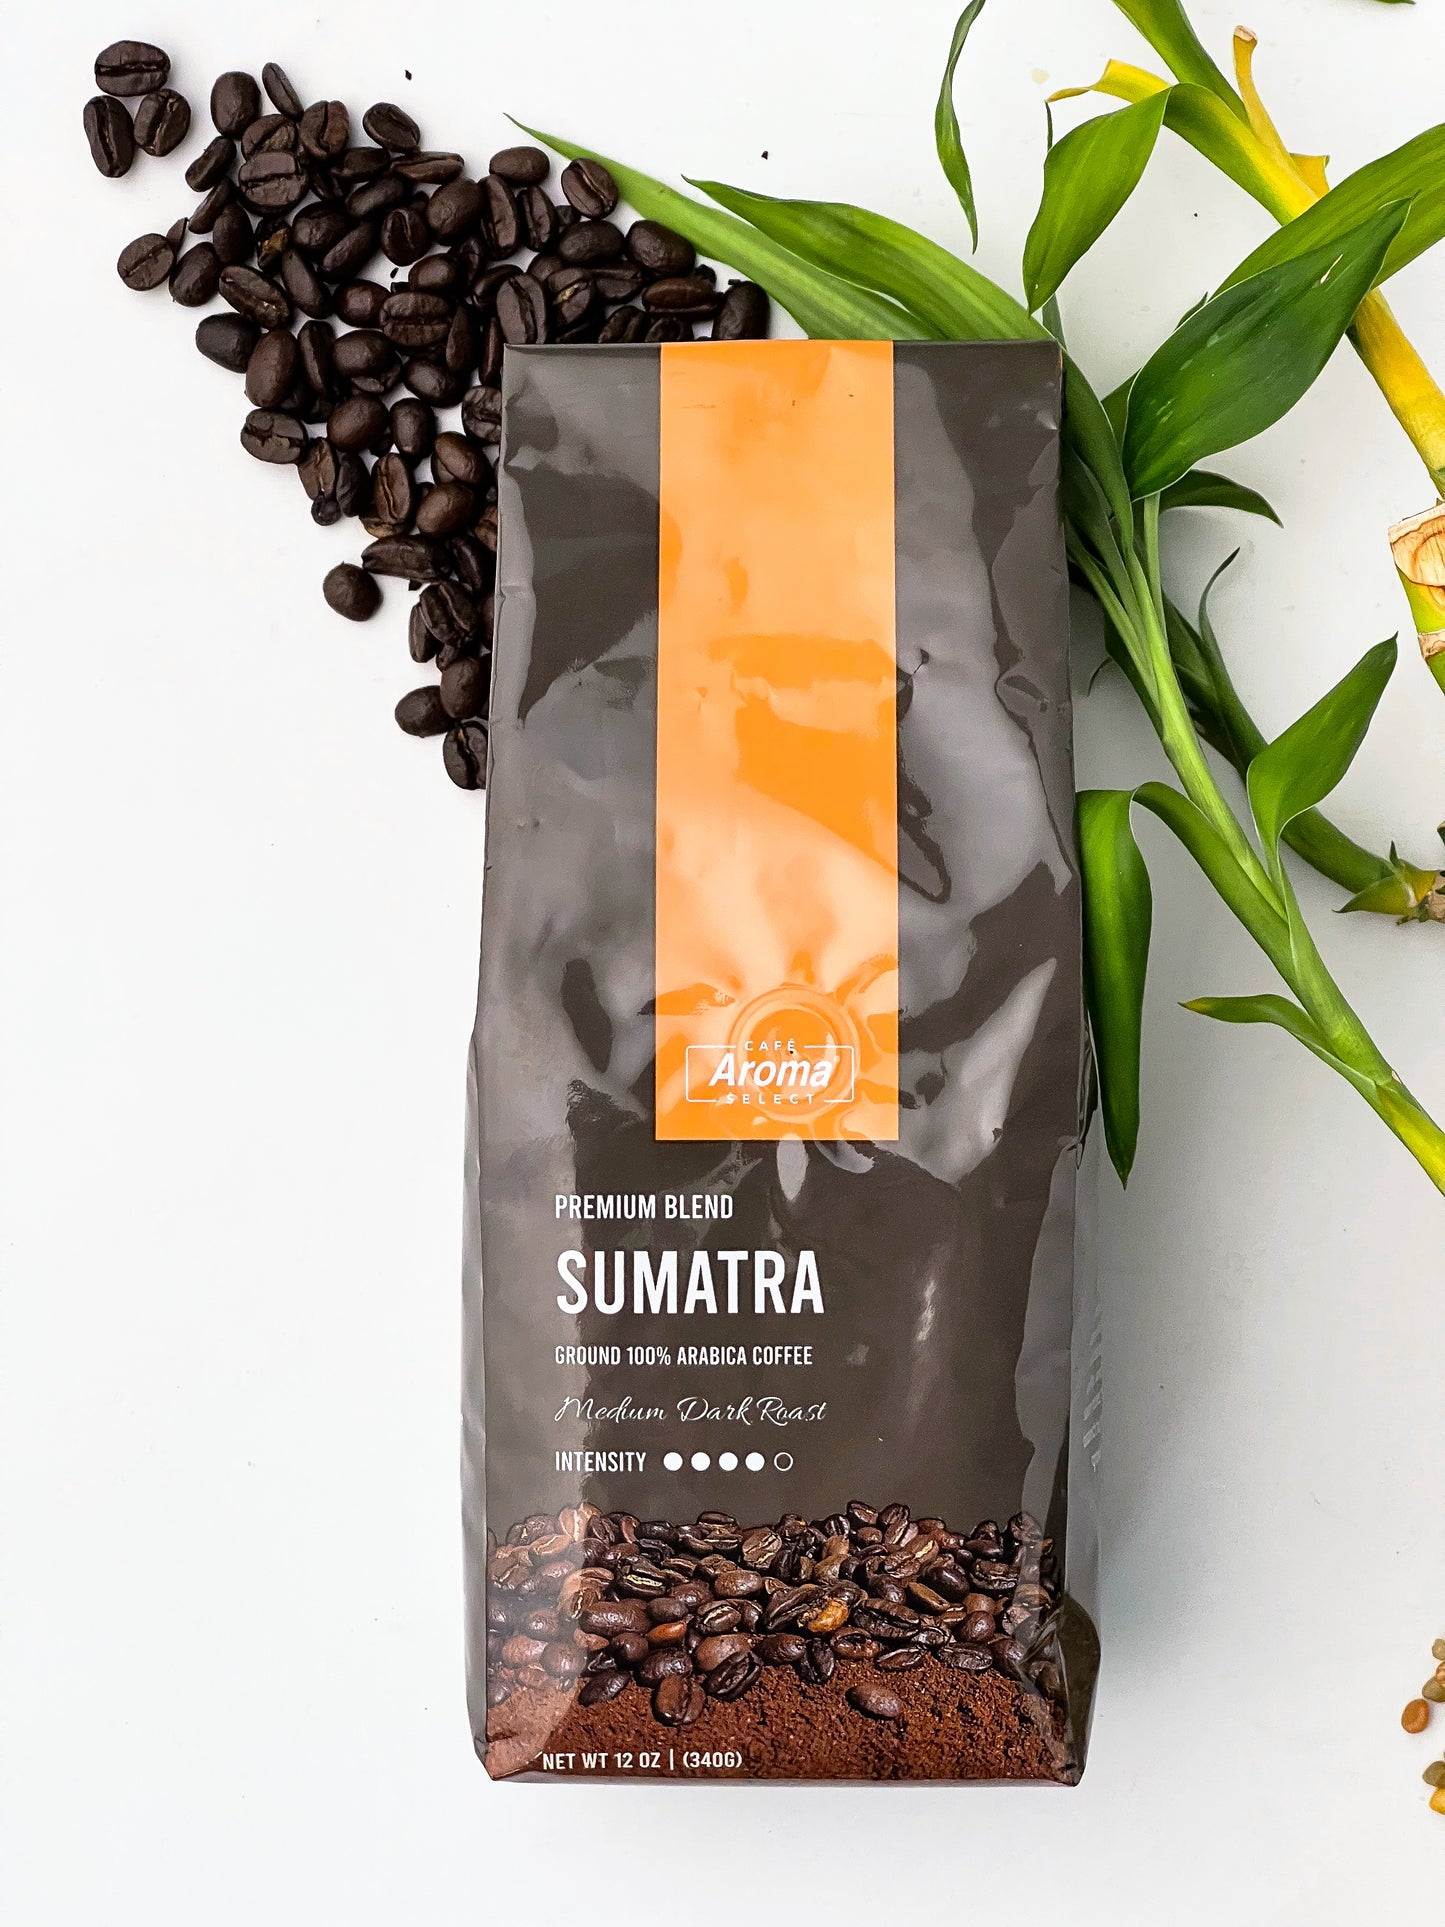 coffee beans and a bag of sumatra ground coffee